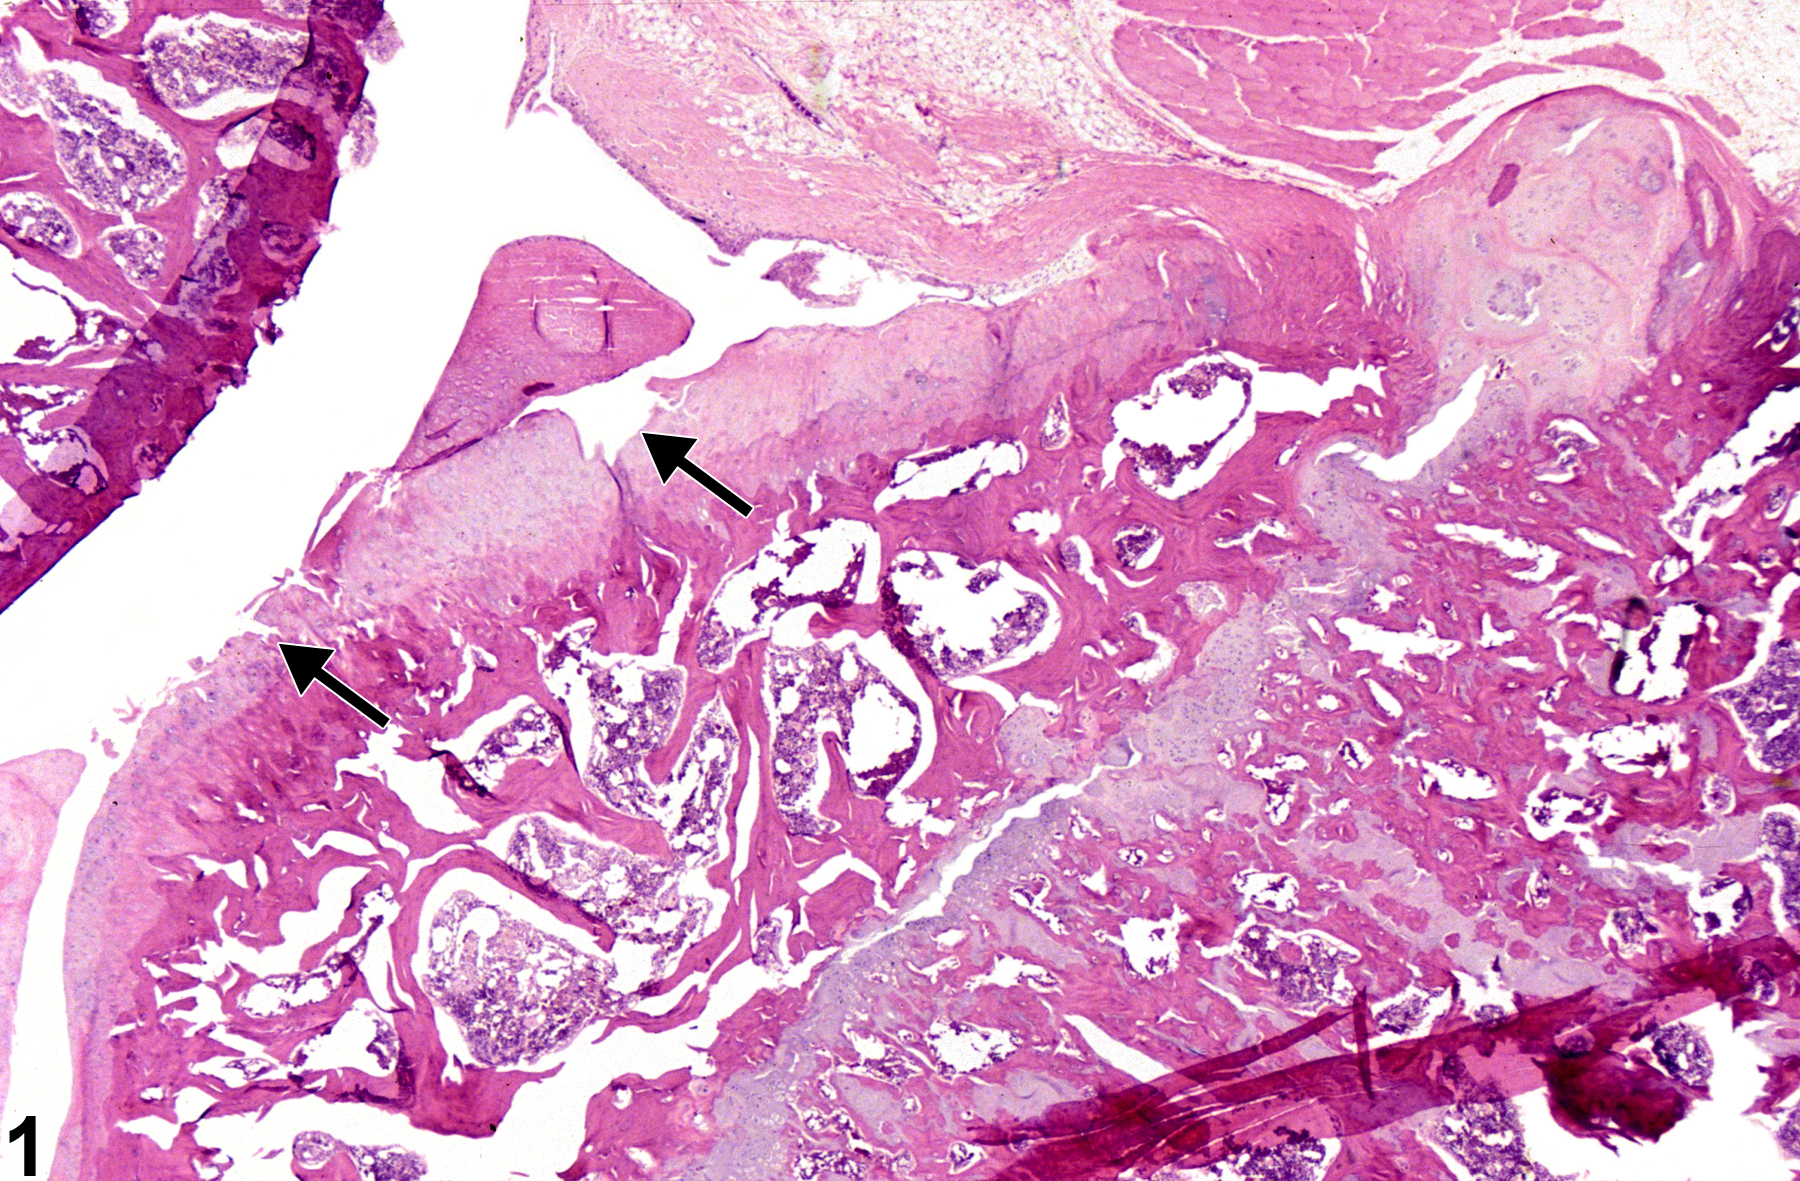 Image of joint degeneration in the bone from a female F344/N rat in a chronic study